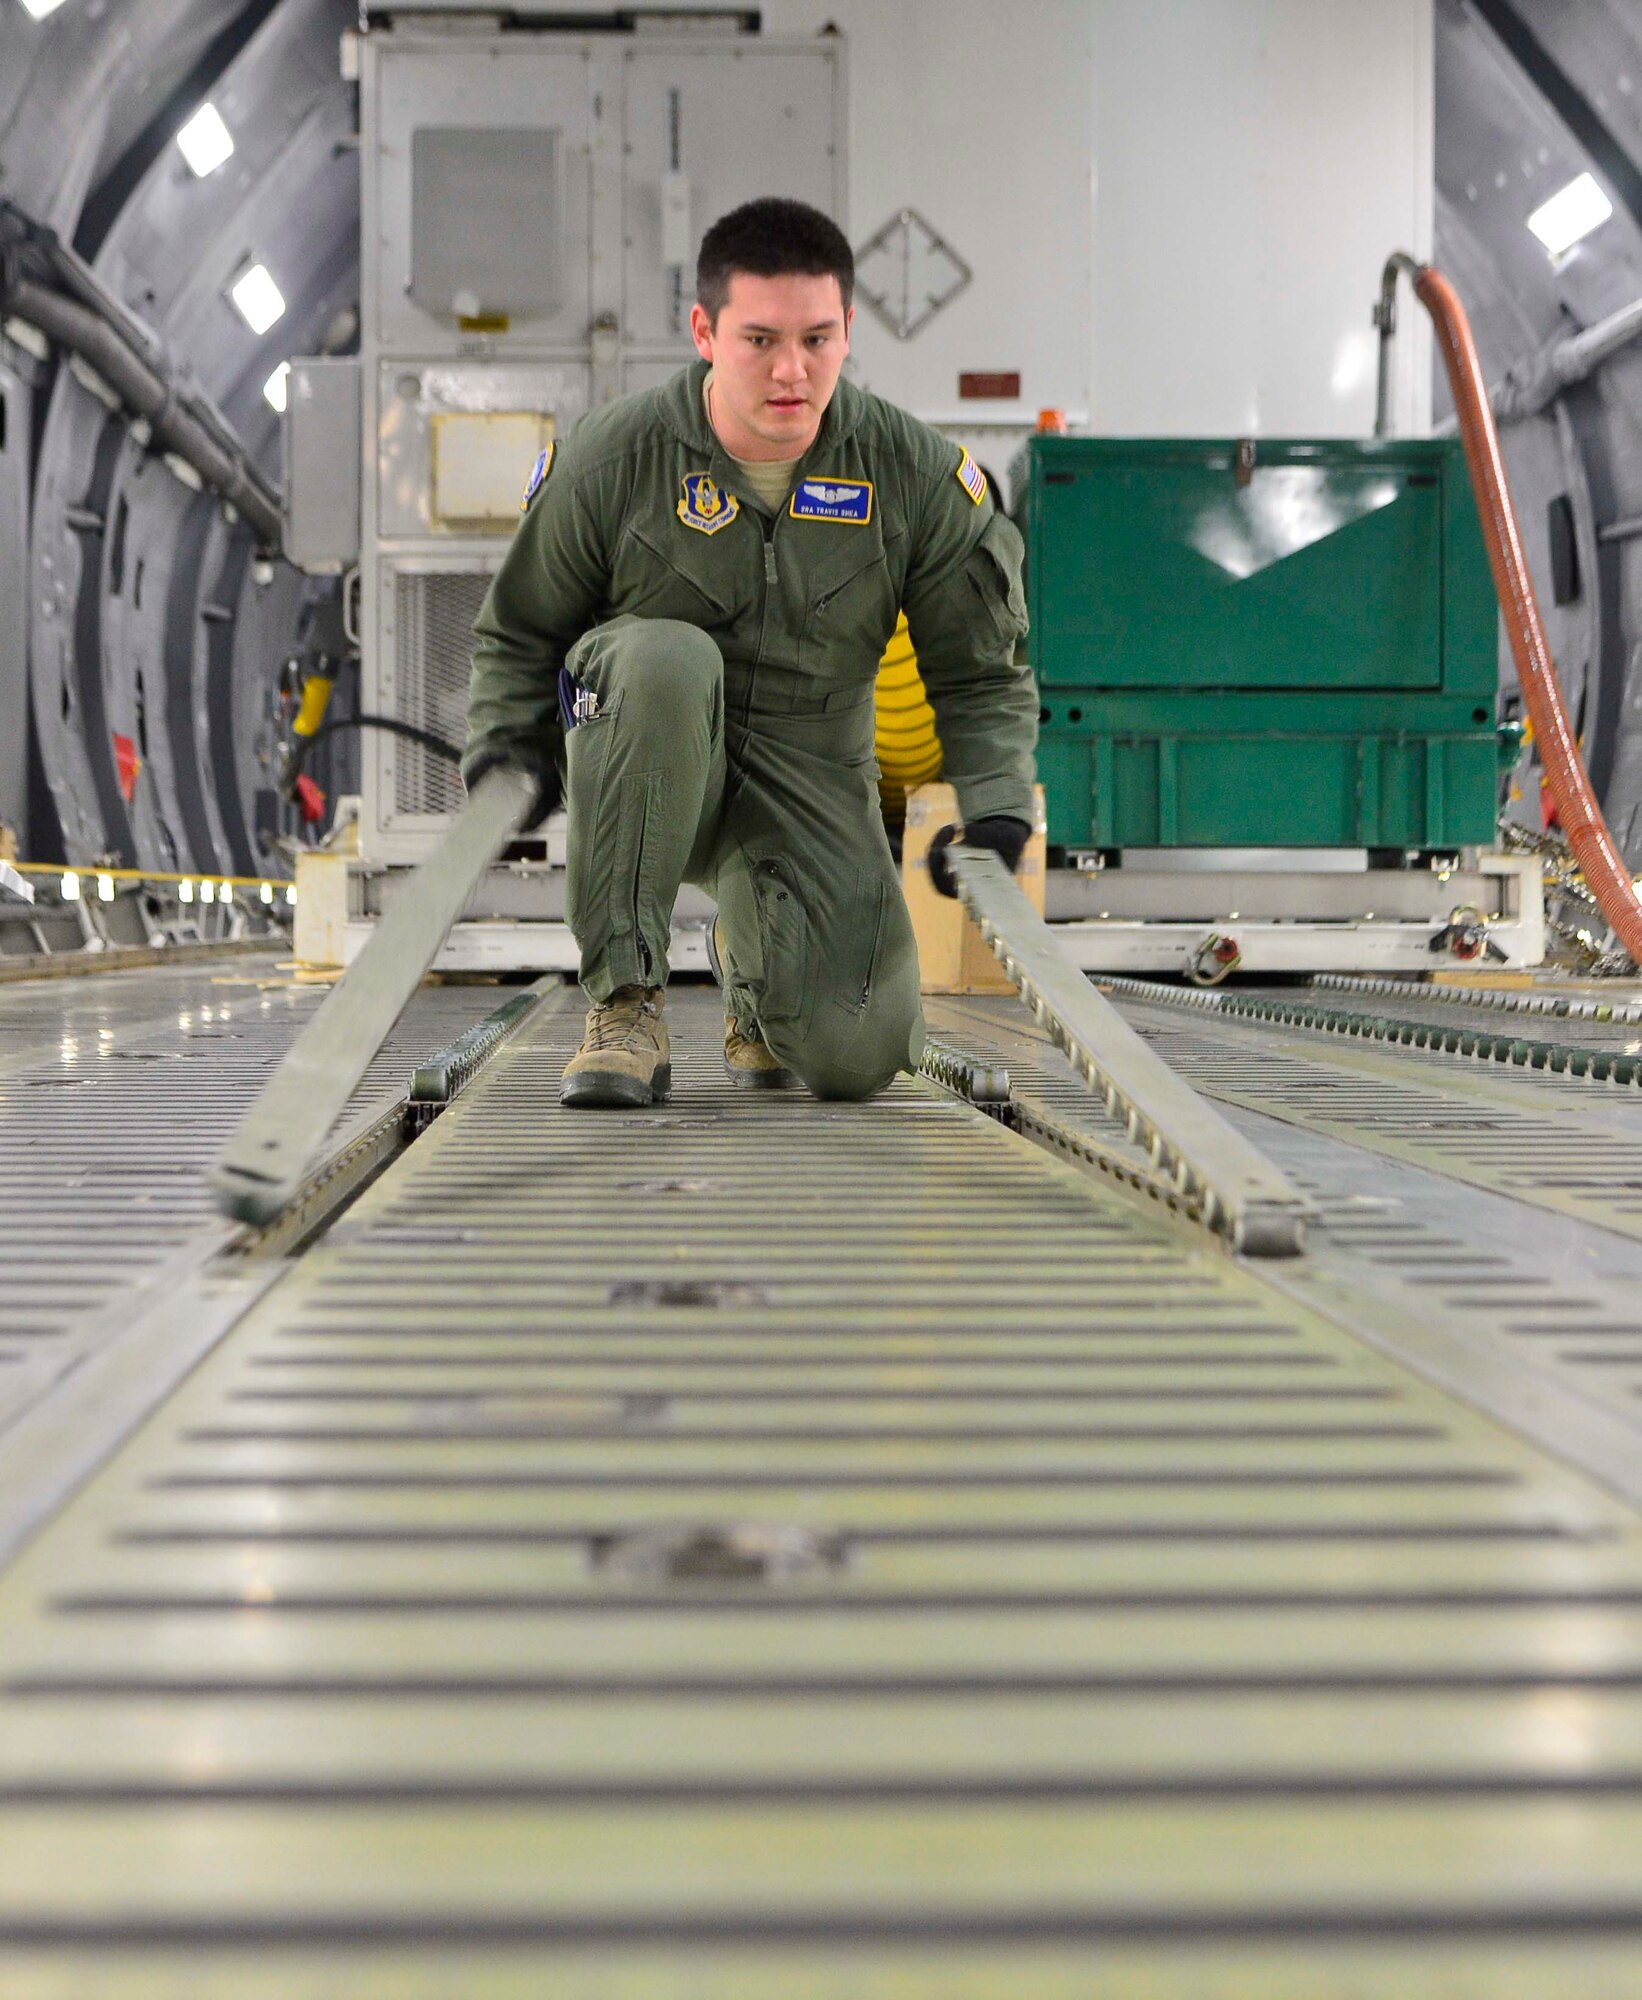 Senior Airman Travis Shea prepares the cargo floor of a C-5M Super Galaxy for the Global Precipitation Measurement Satellite’s support equipment Nov. 21, 2013, at Joint Base Andrews, Md. The mission to deliver the satellite to Japan was Shea’s first. Shea is a 709th Airlift Squadron loadmaster student. (U.S. Air Force photo/Tech. Sgt. Jeremy Larlee)